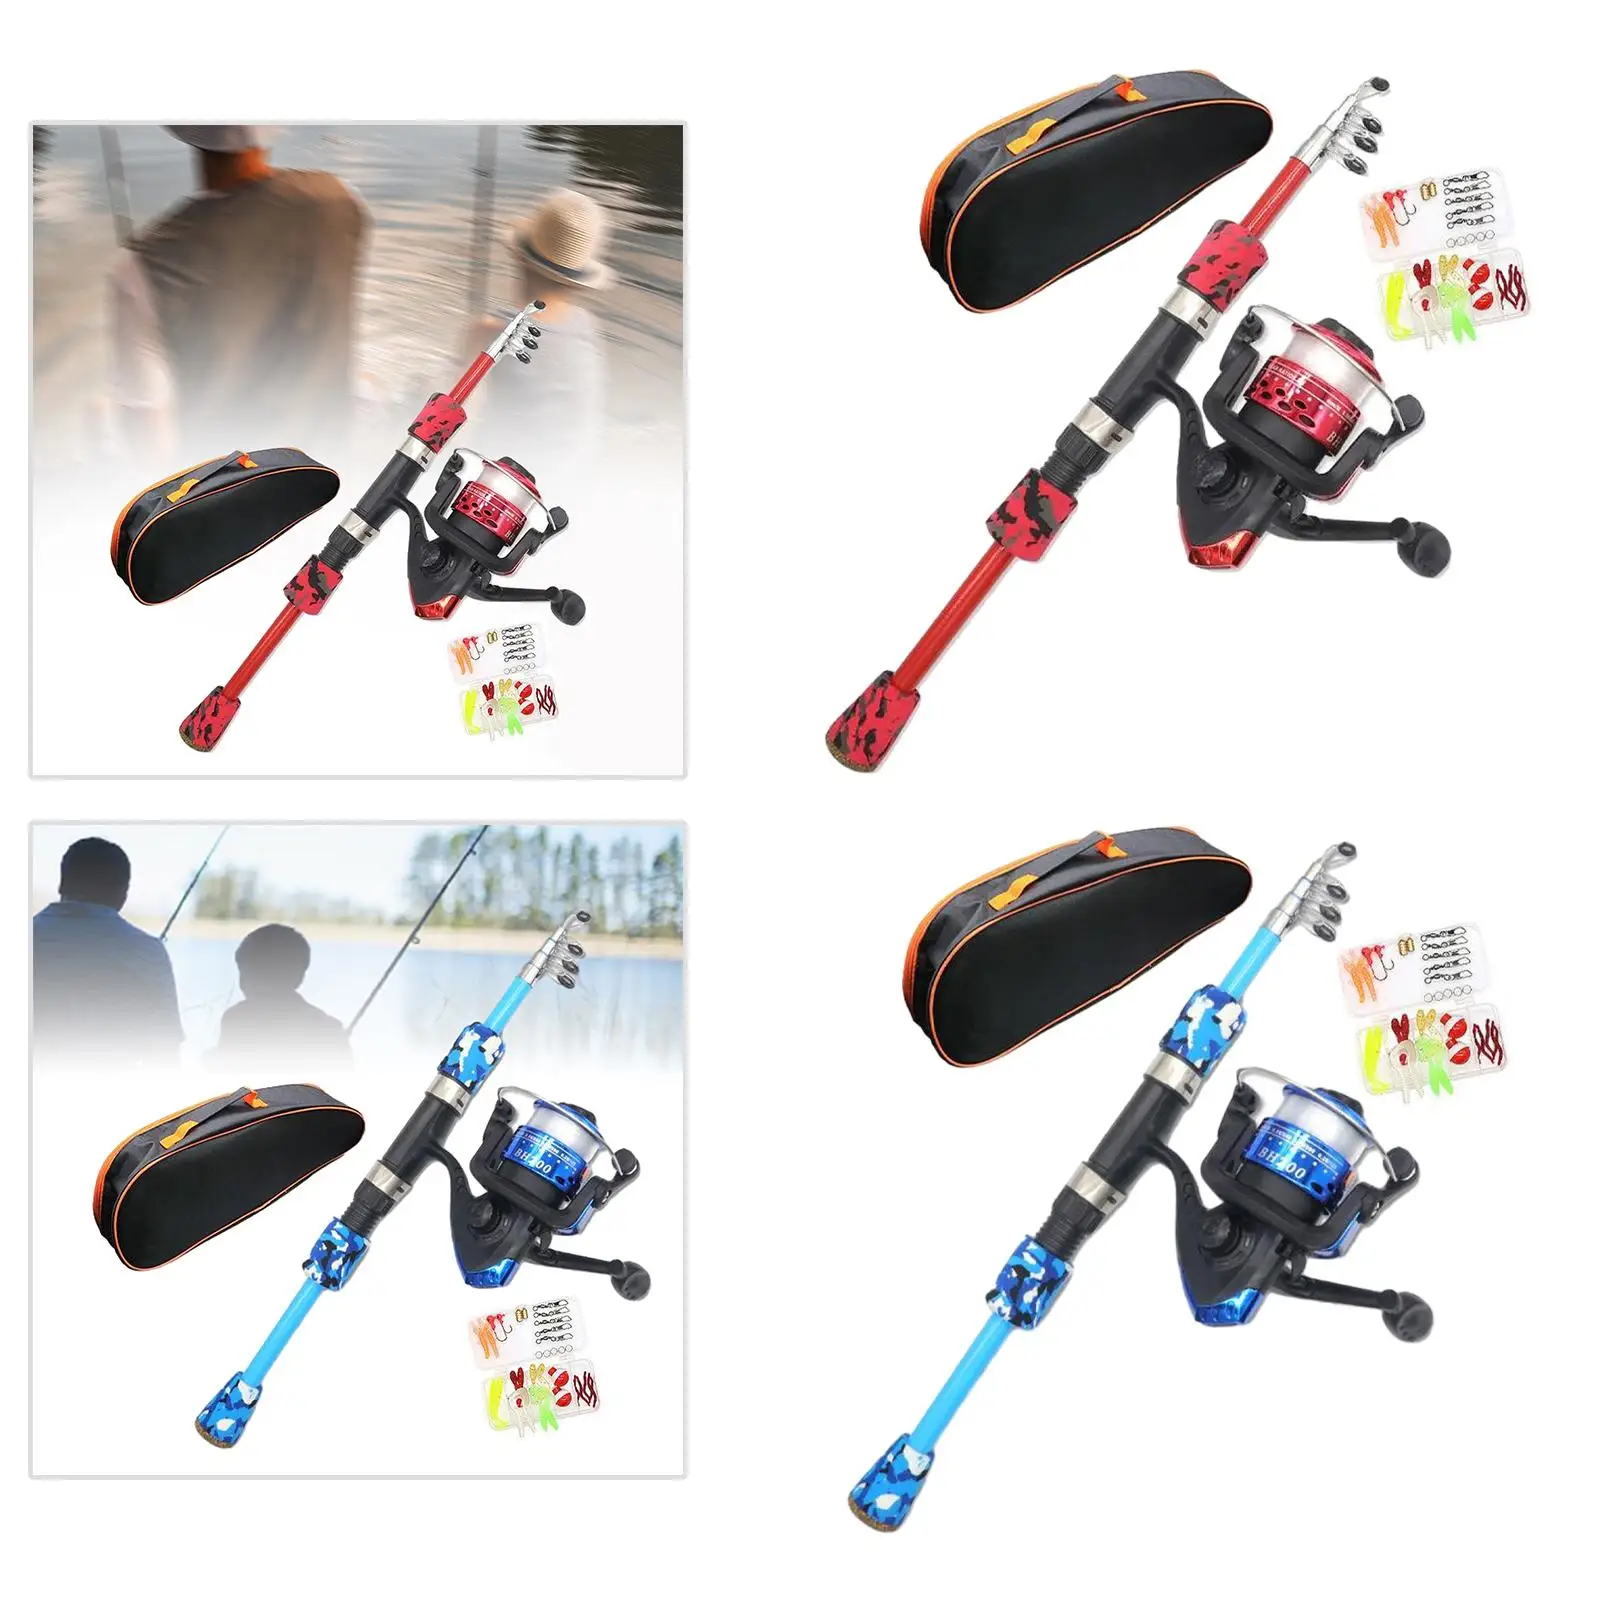 Kids Fishing Rod Set Outdoor with Travel Bag Telescopic Fishing Rod and Reel